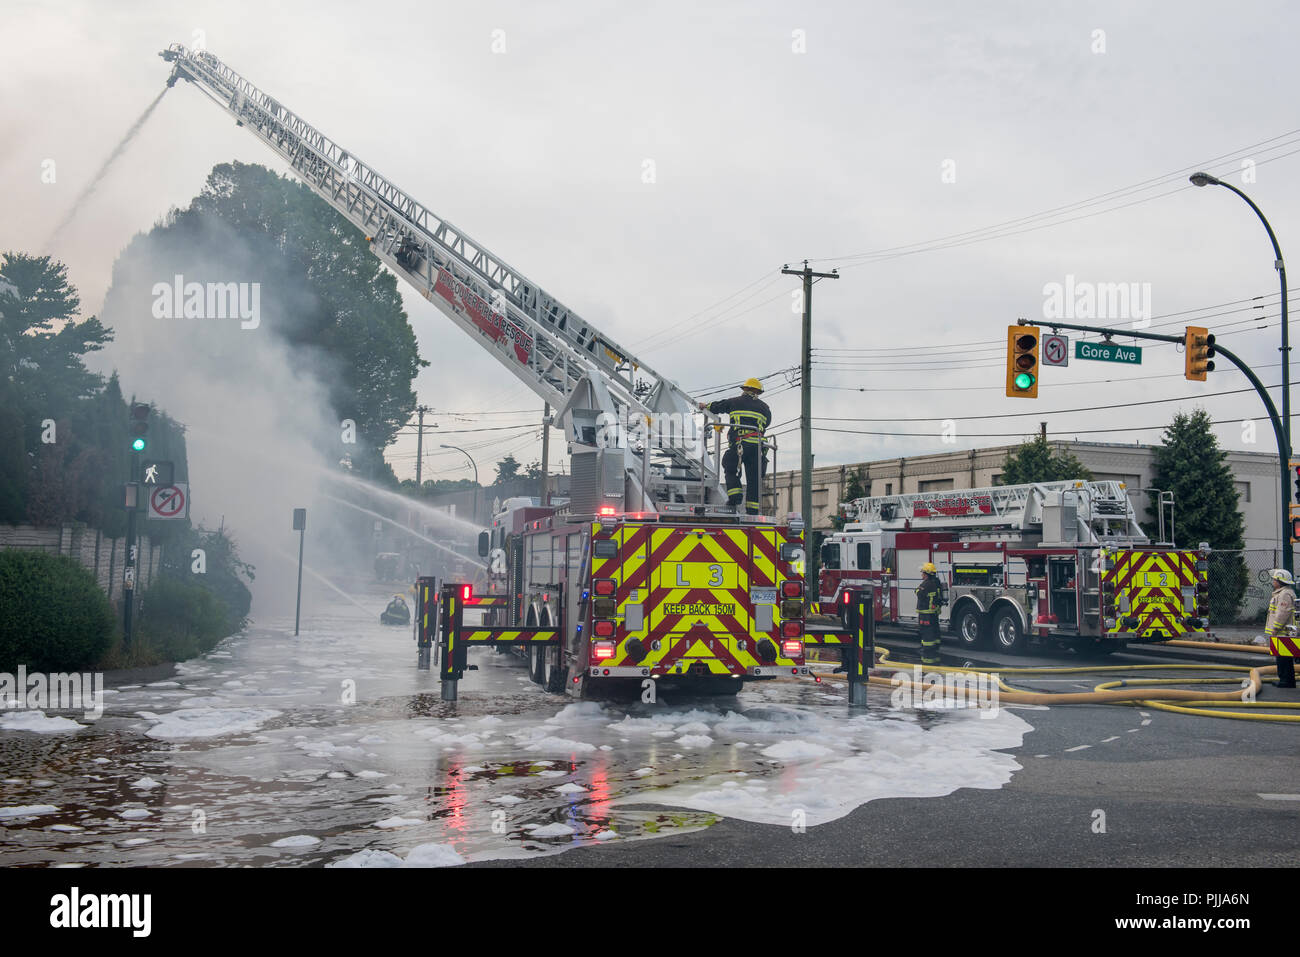 Emergency personnel fire trucks and fire men at the scene of a house fire, Vancouver city. Stock Photo